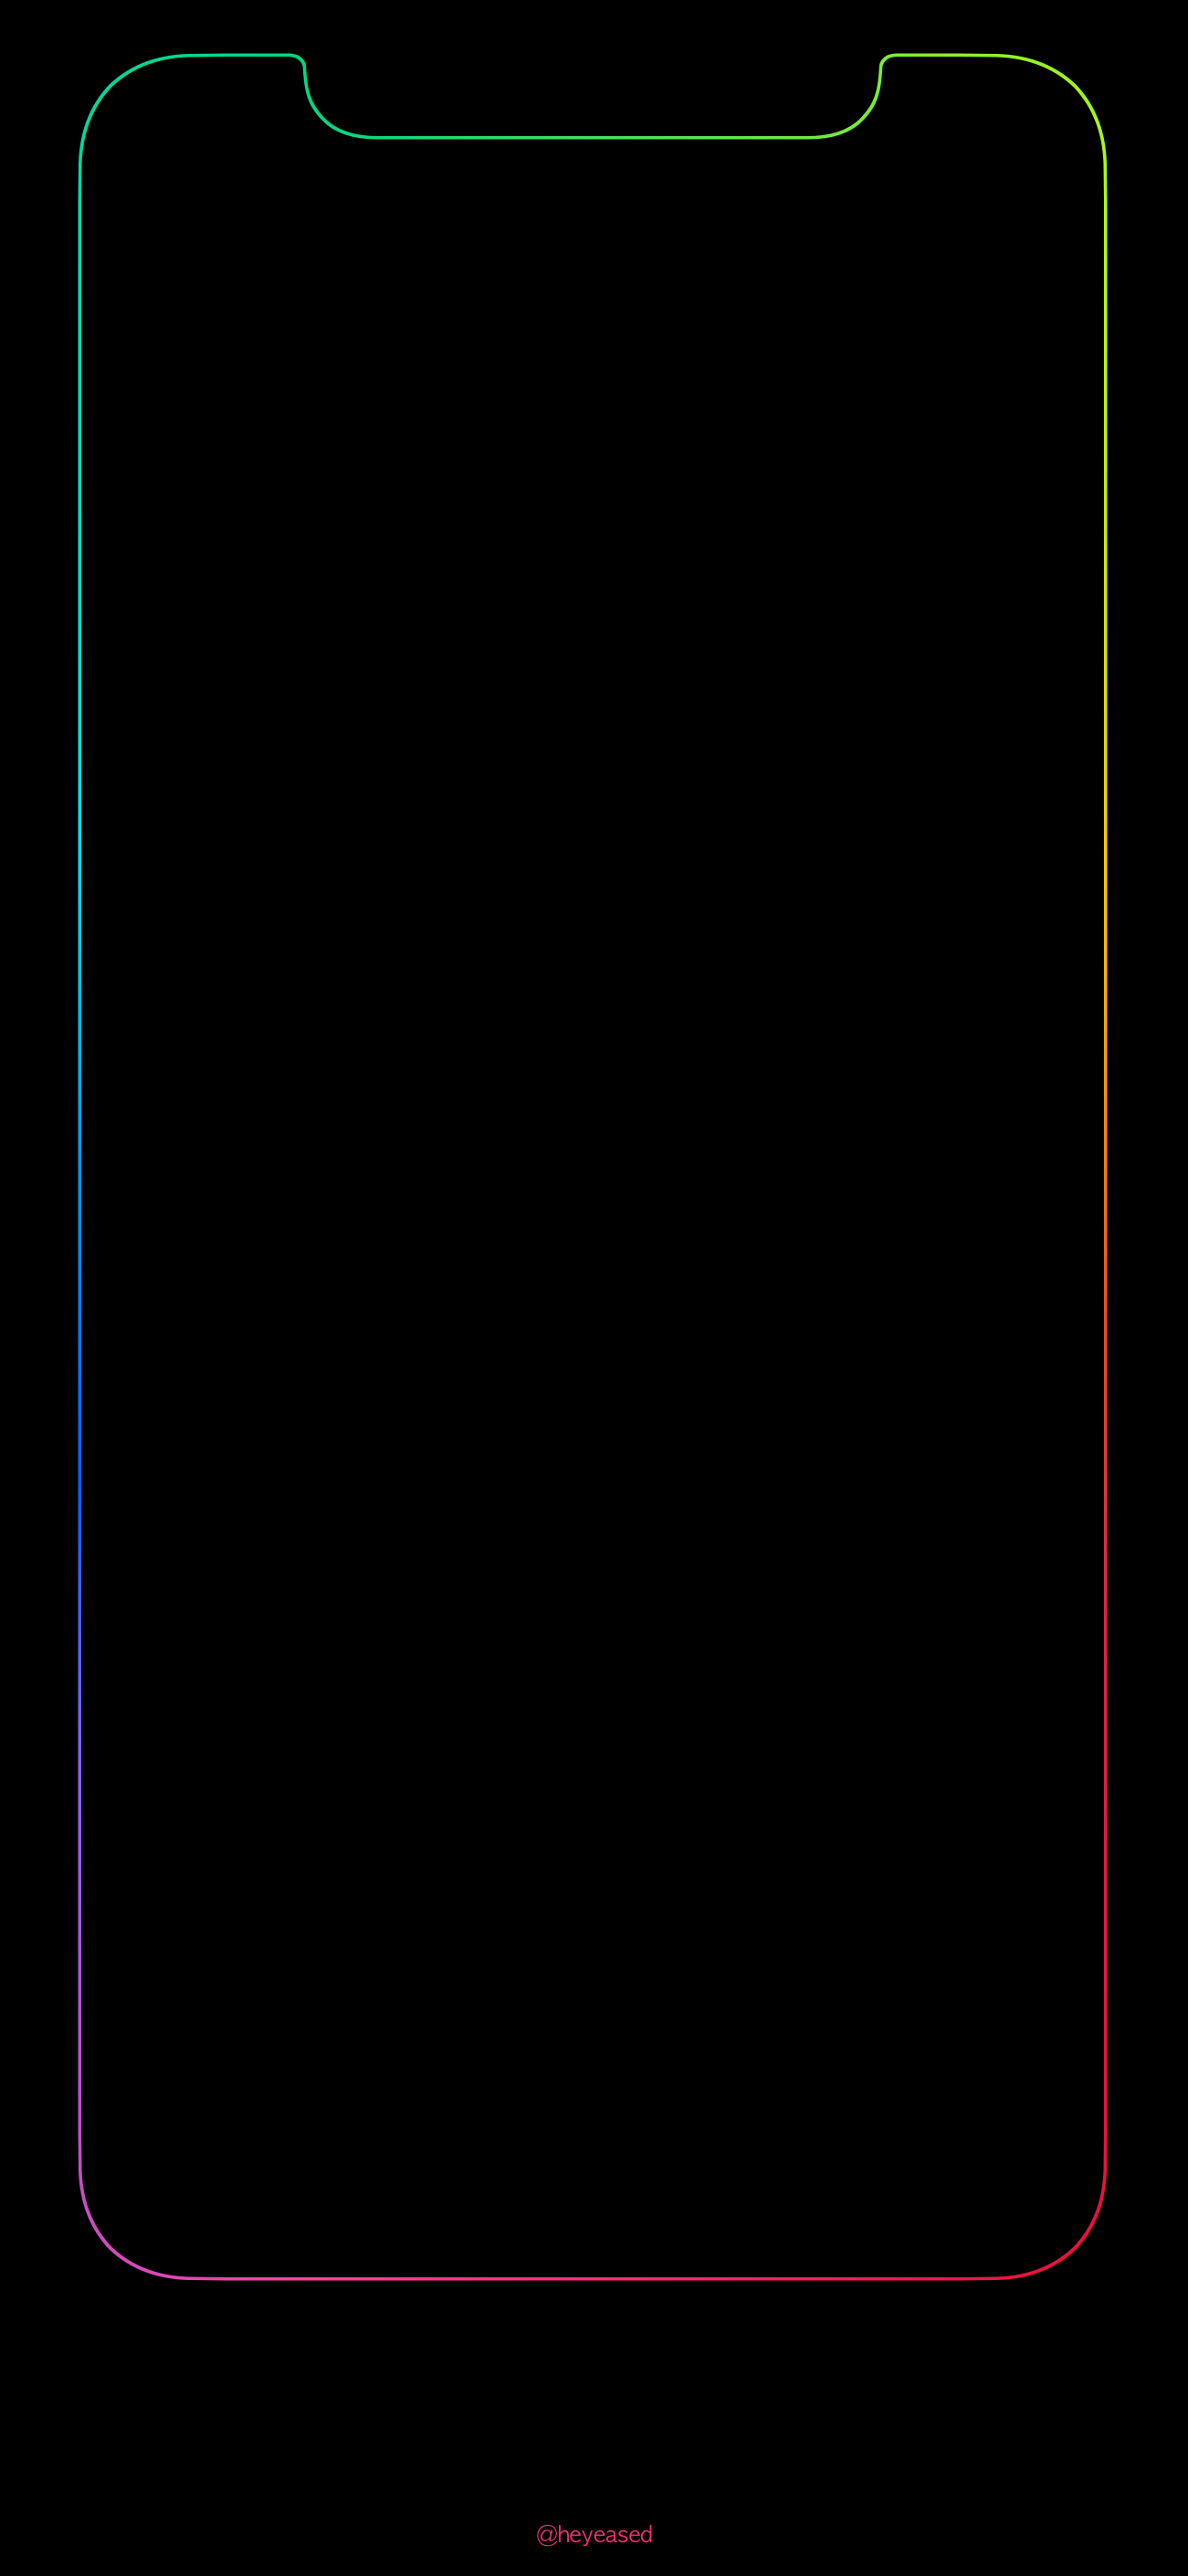 Please Can Someone Make This Wallpaper Fit The Mi Notch Xiaomi